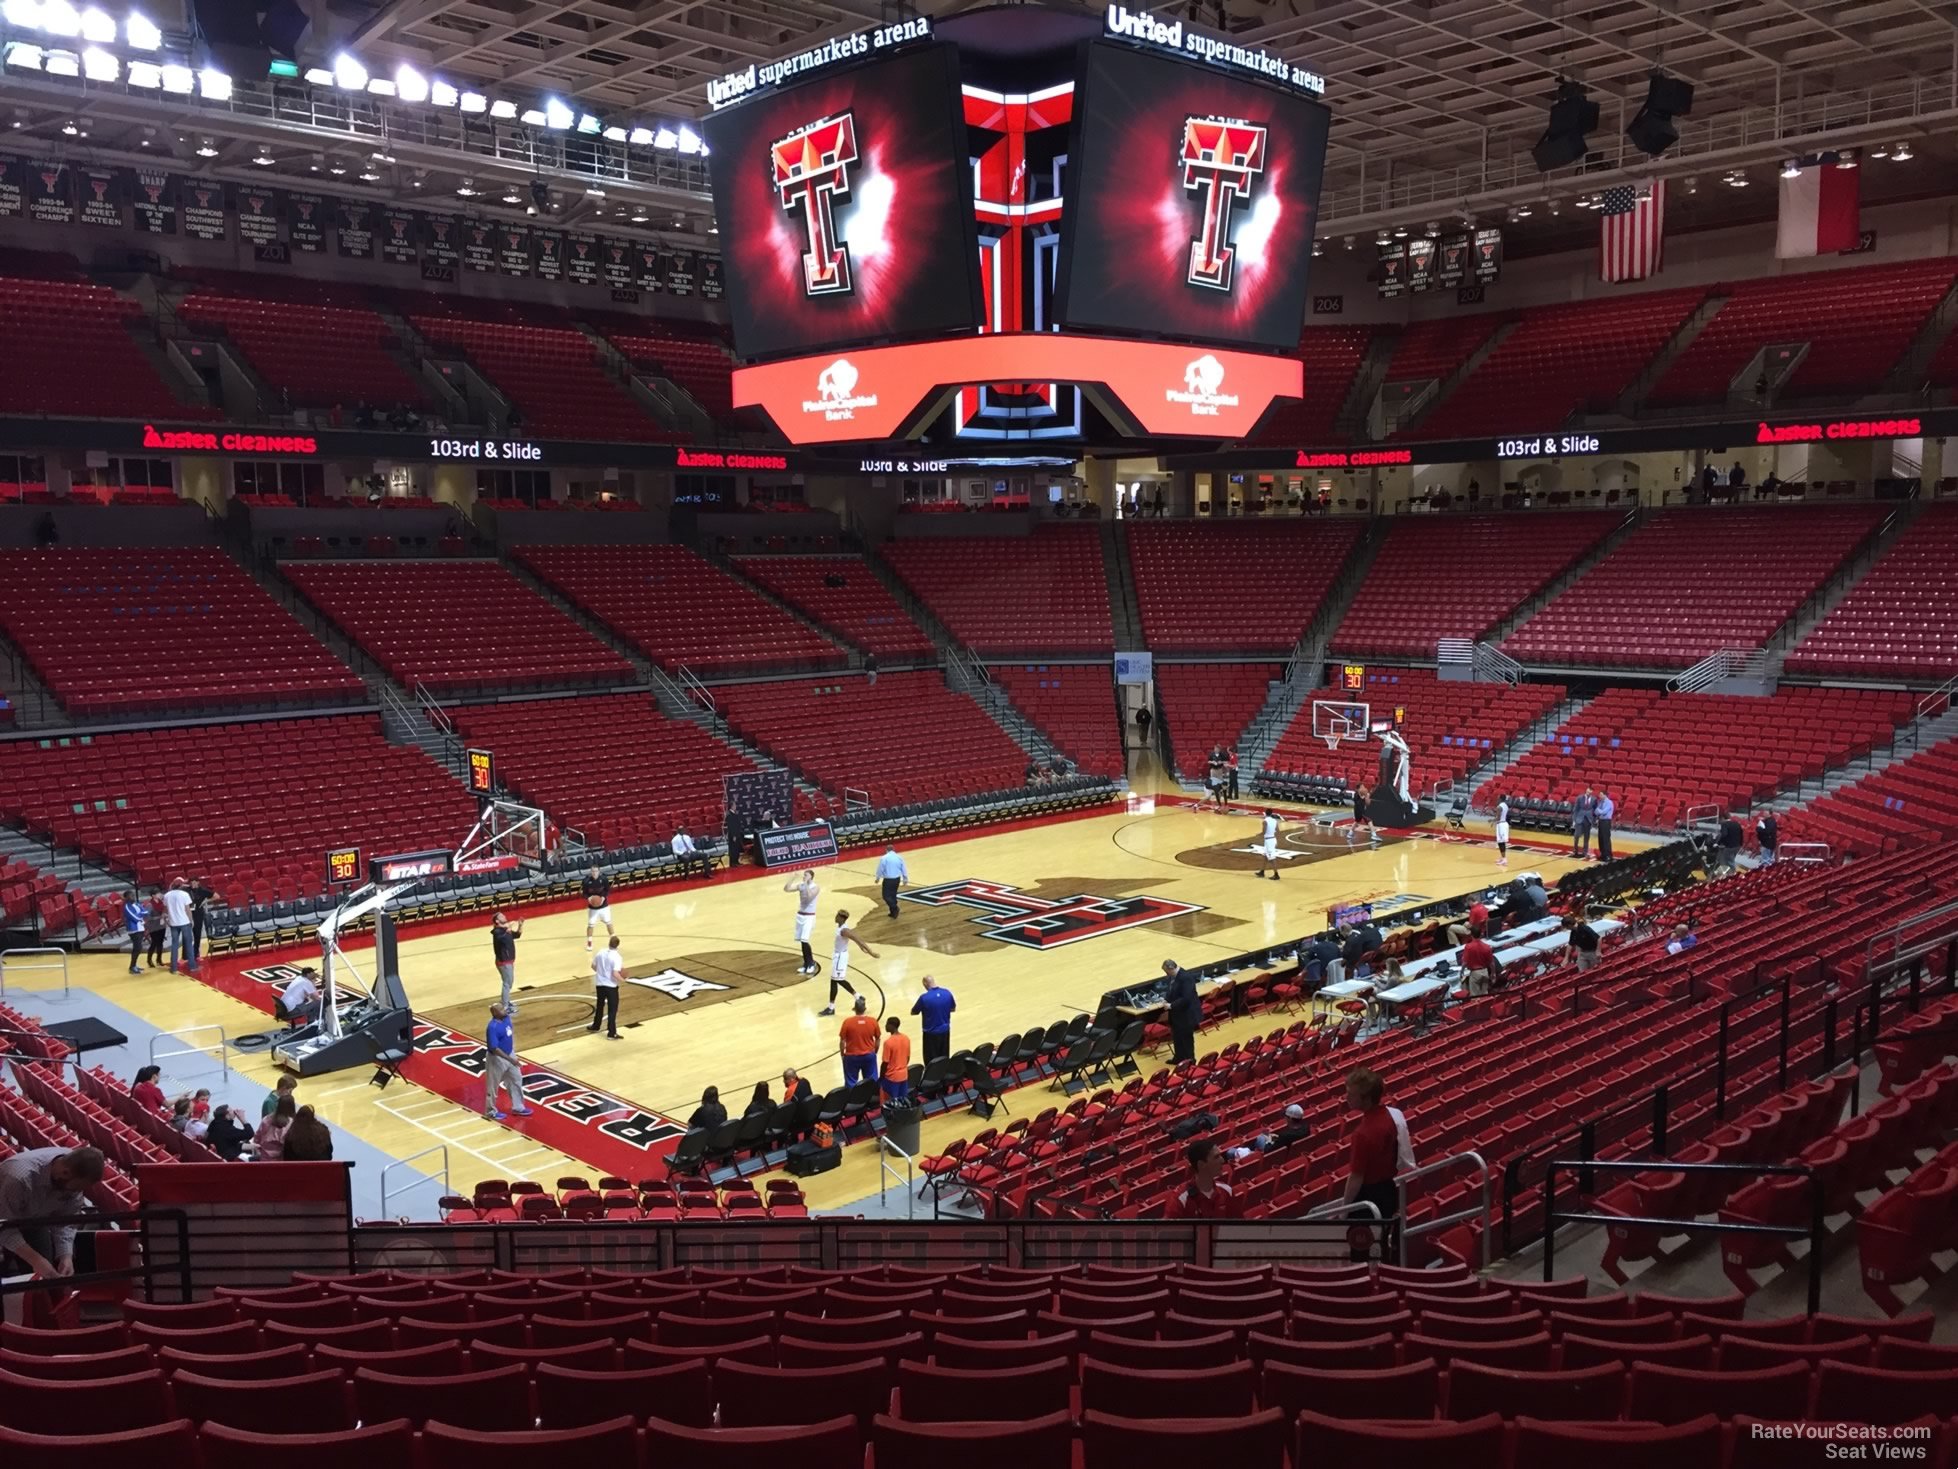 section 116, row 25 seat view  - united supermarkets arena